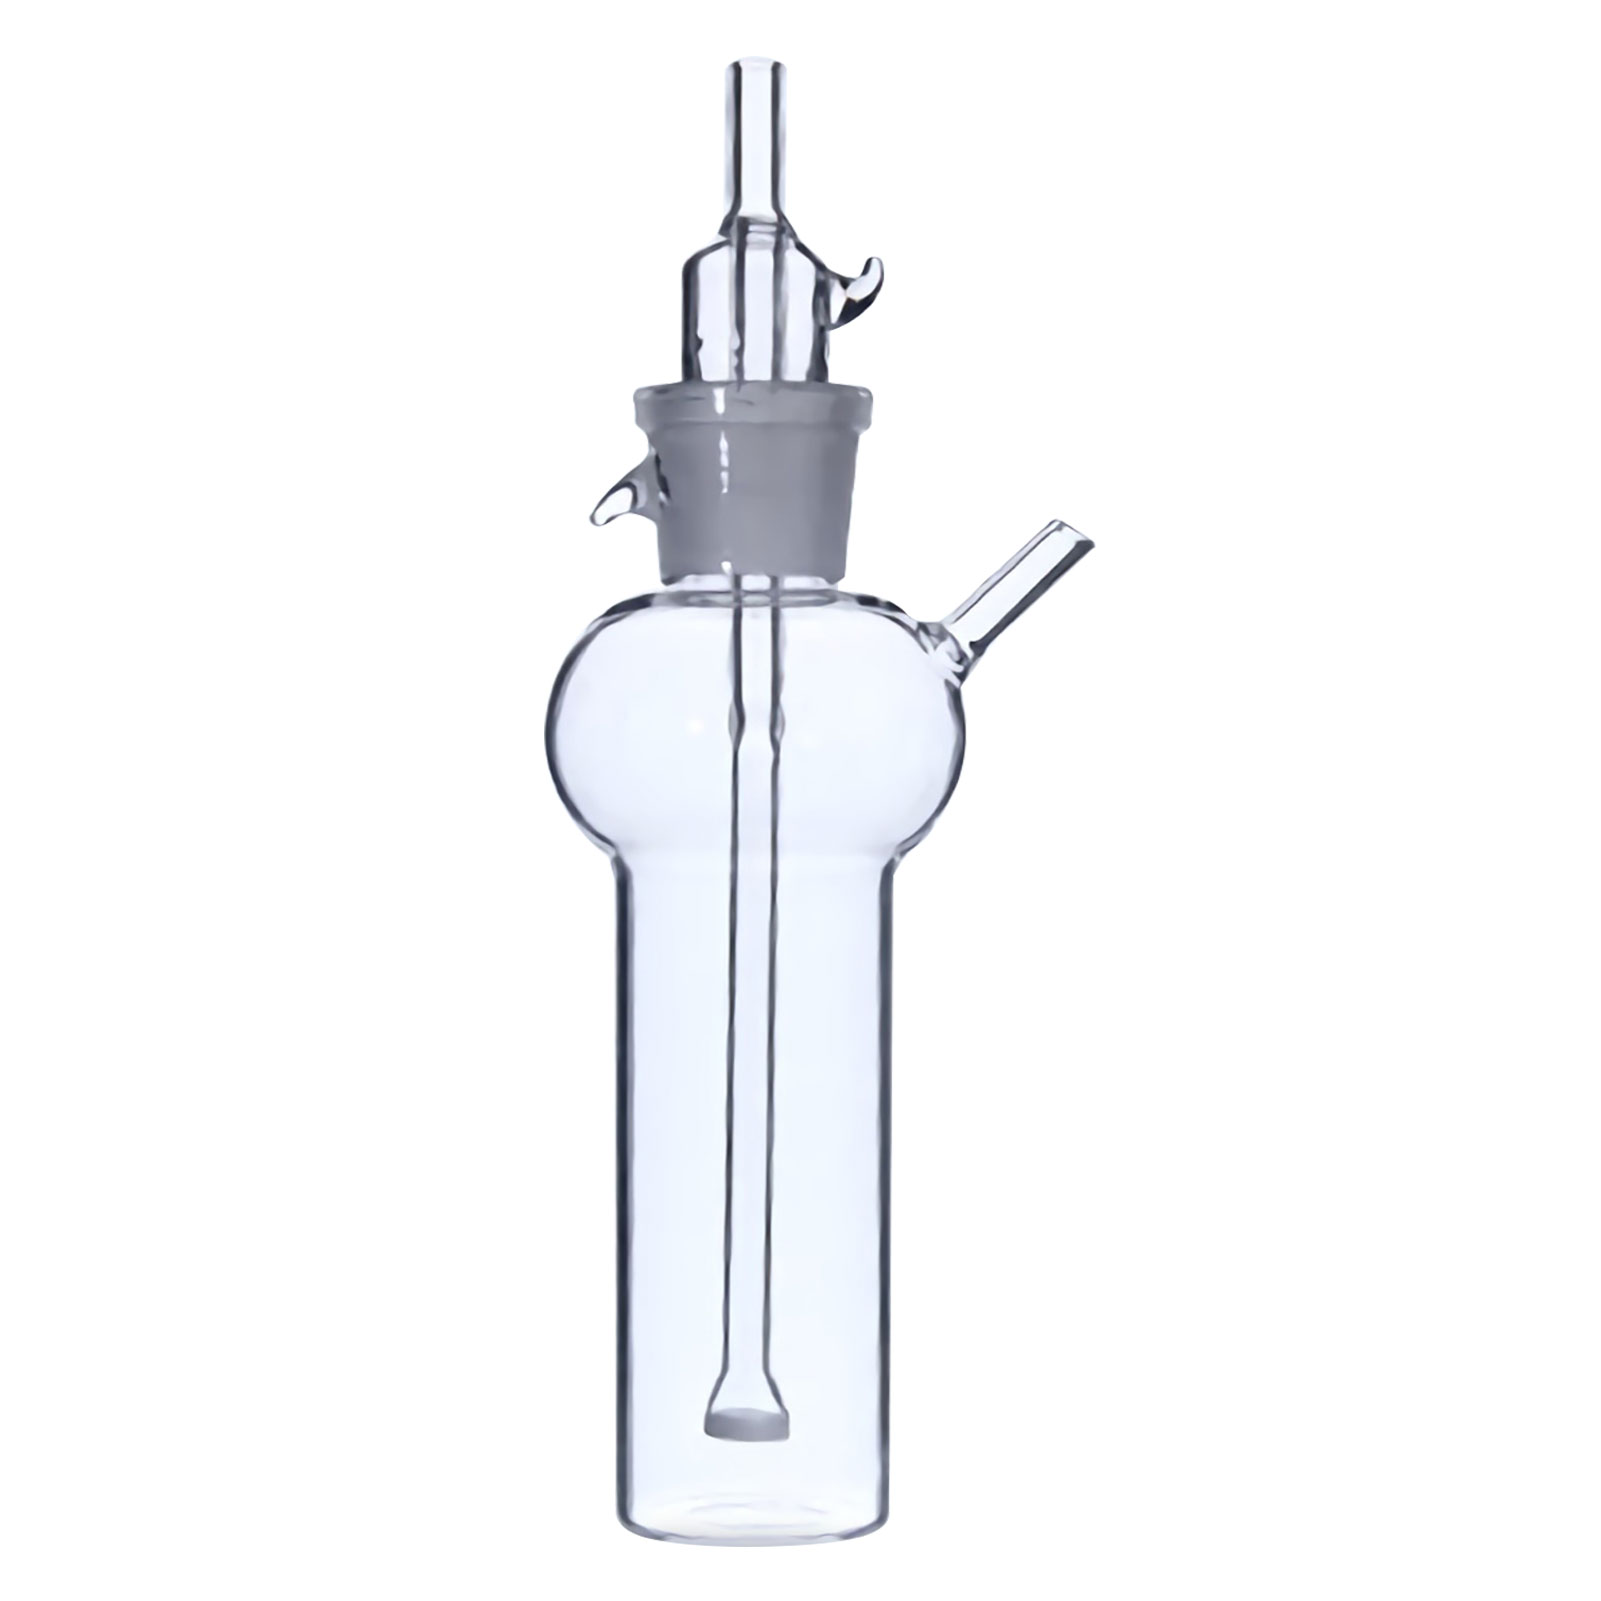 ADAMAS BETA Bubbling Absorption Bottle Grinding Mouth Sand Core Laboratory Air Sampling Tube Glass Absorption Tubes 10-125ml